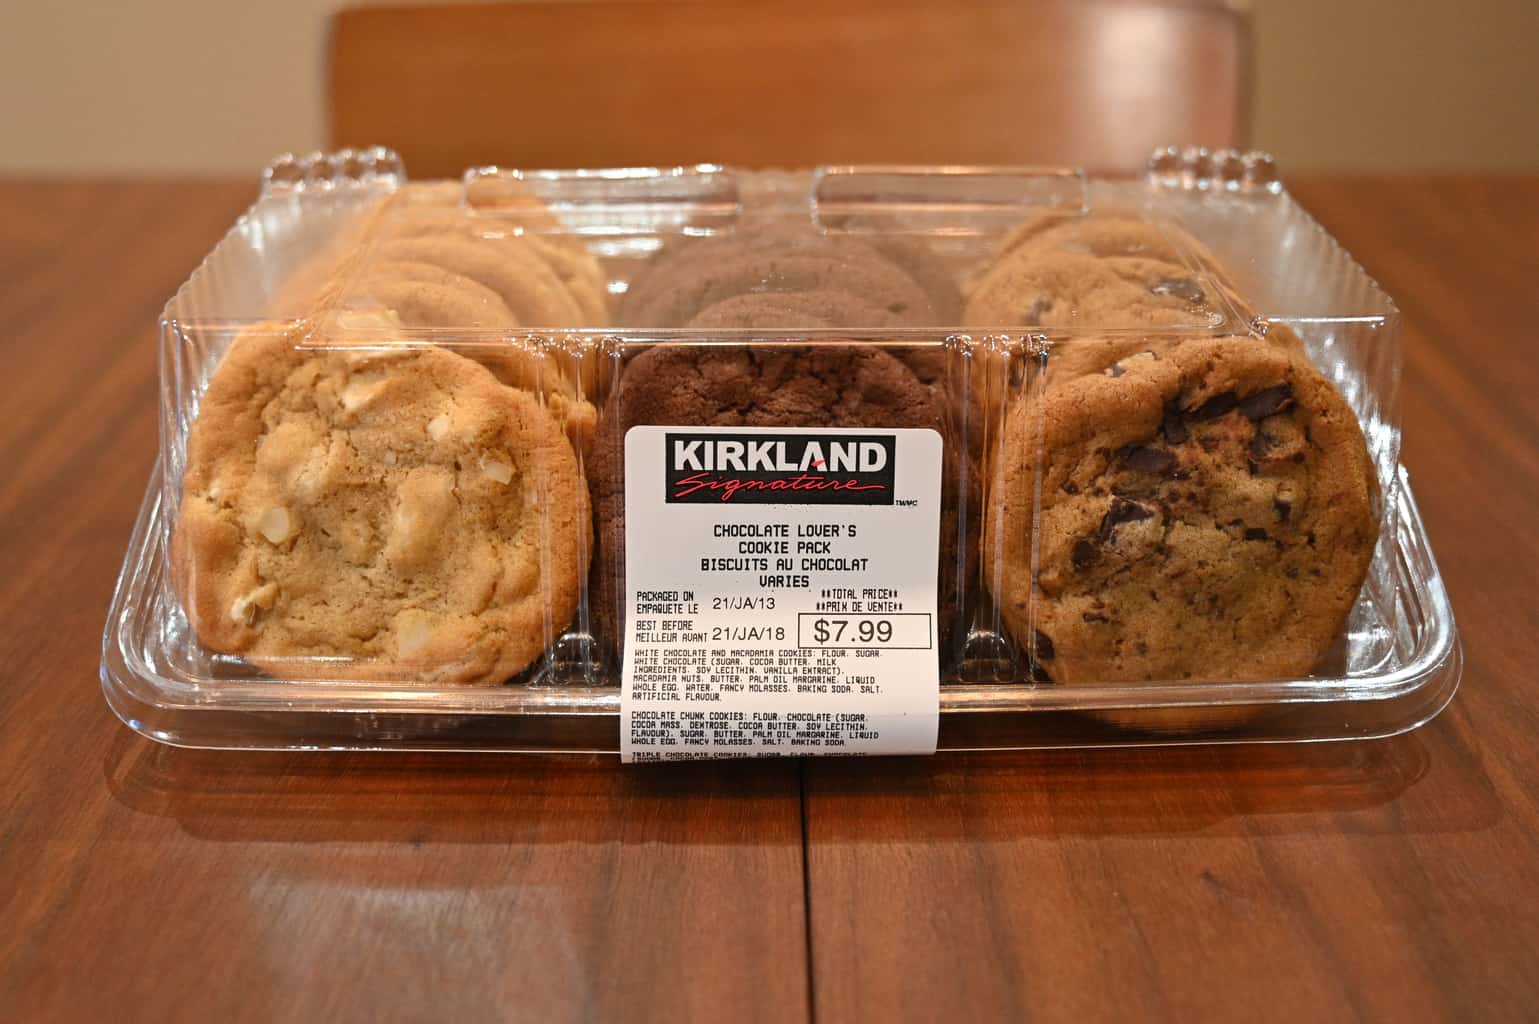 The Kirkland Signature Chocolate Lover's Cookie Pack.